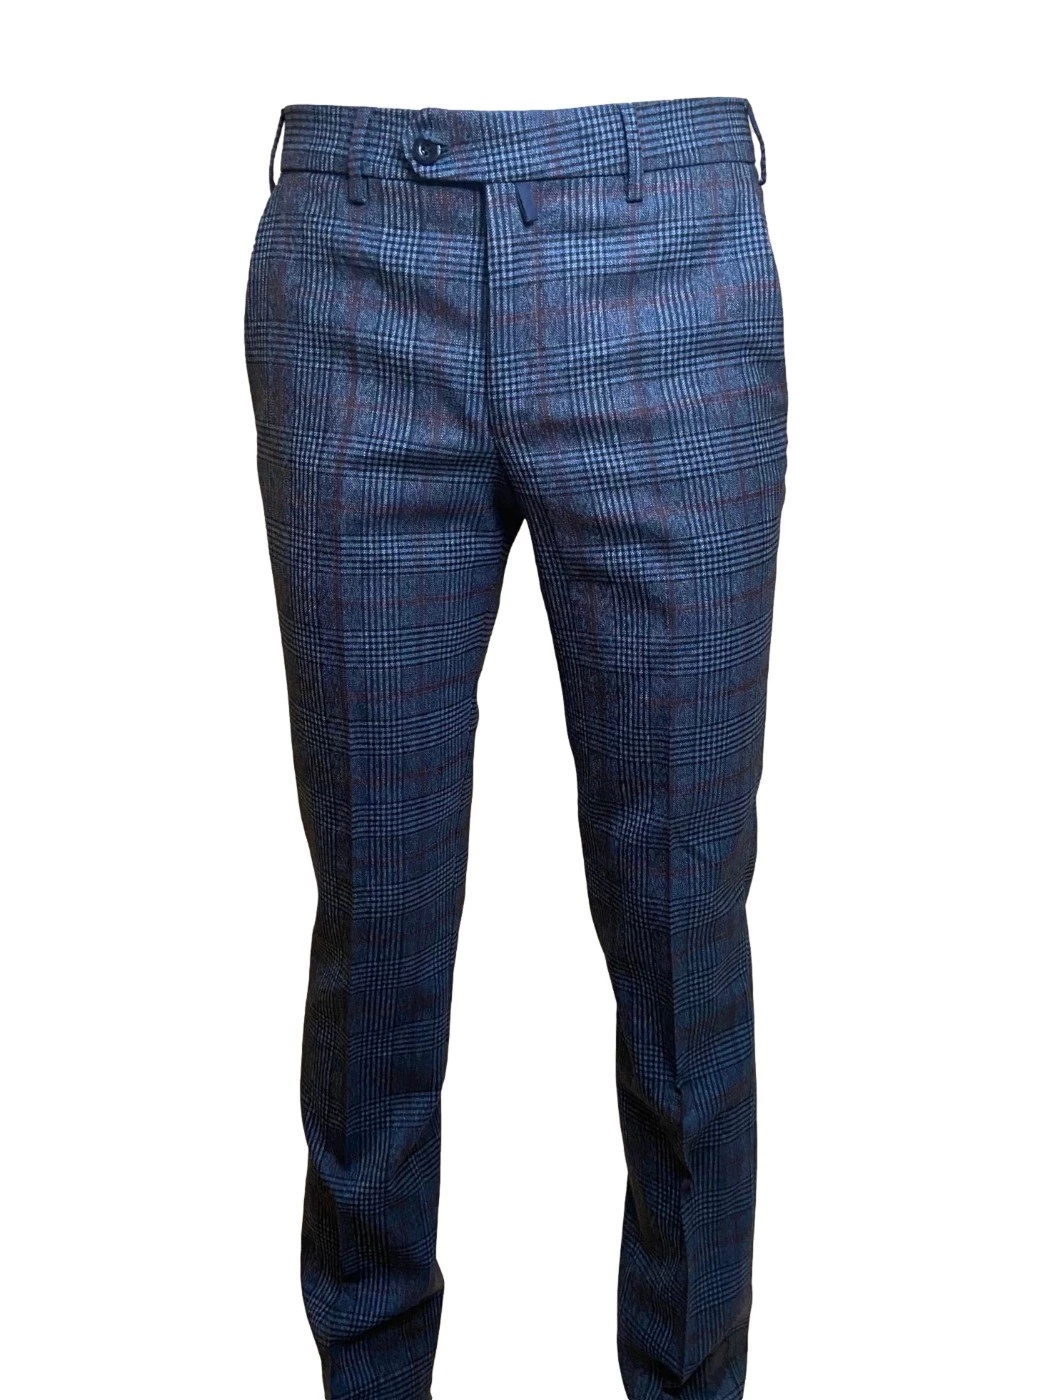 Meyer classic trousers